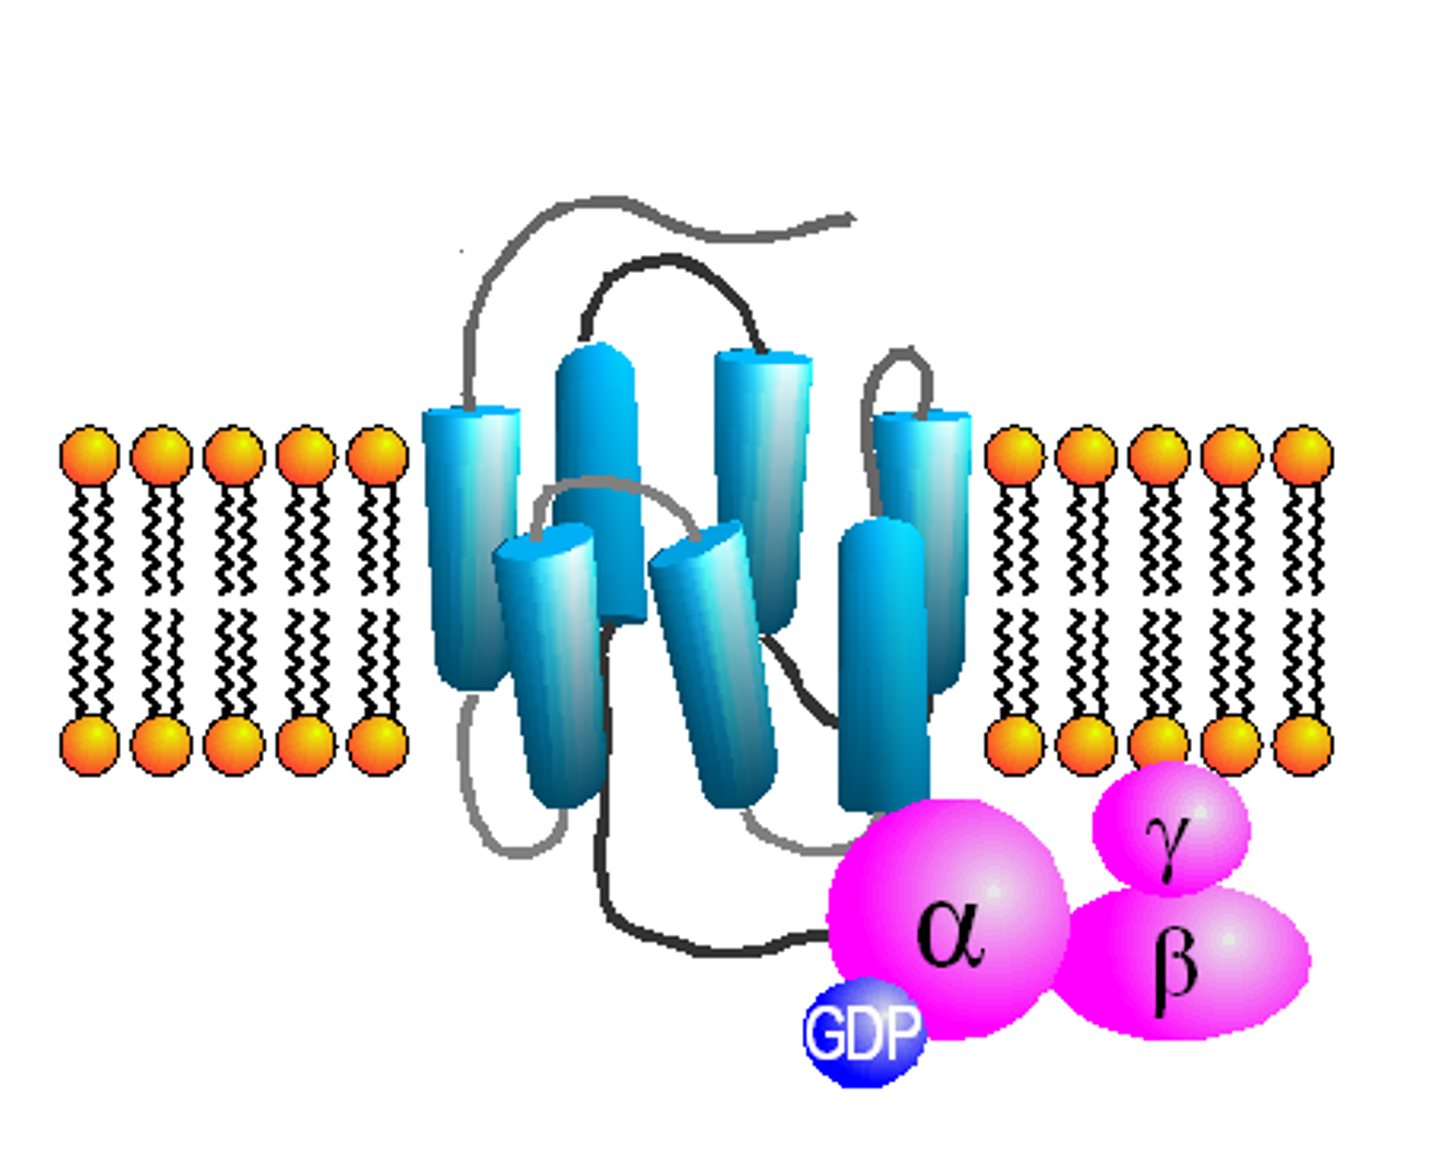 <p><mark data-color="red">Secondary messaging: G-proteins</mark></p><p>Can you label, describe and explain what this diagram is/shows?</p>